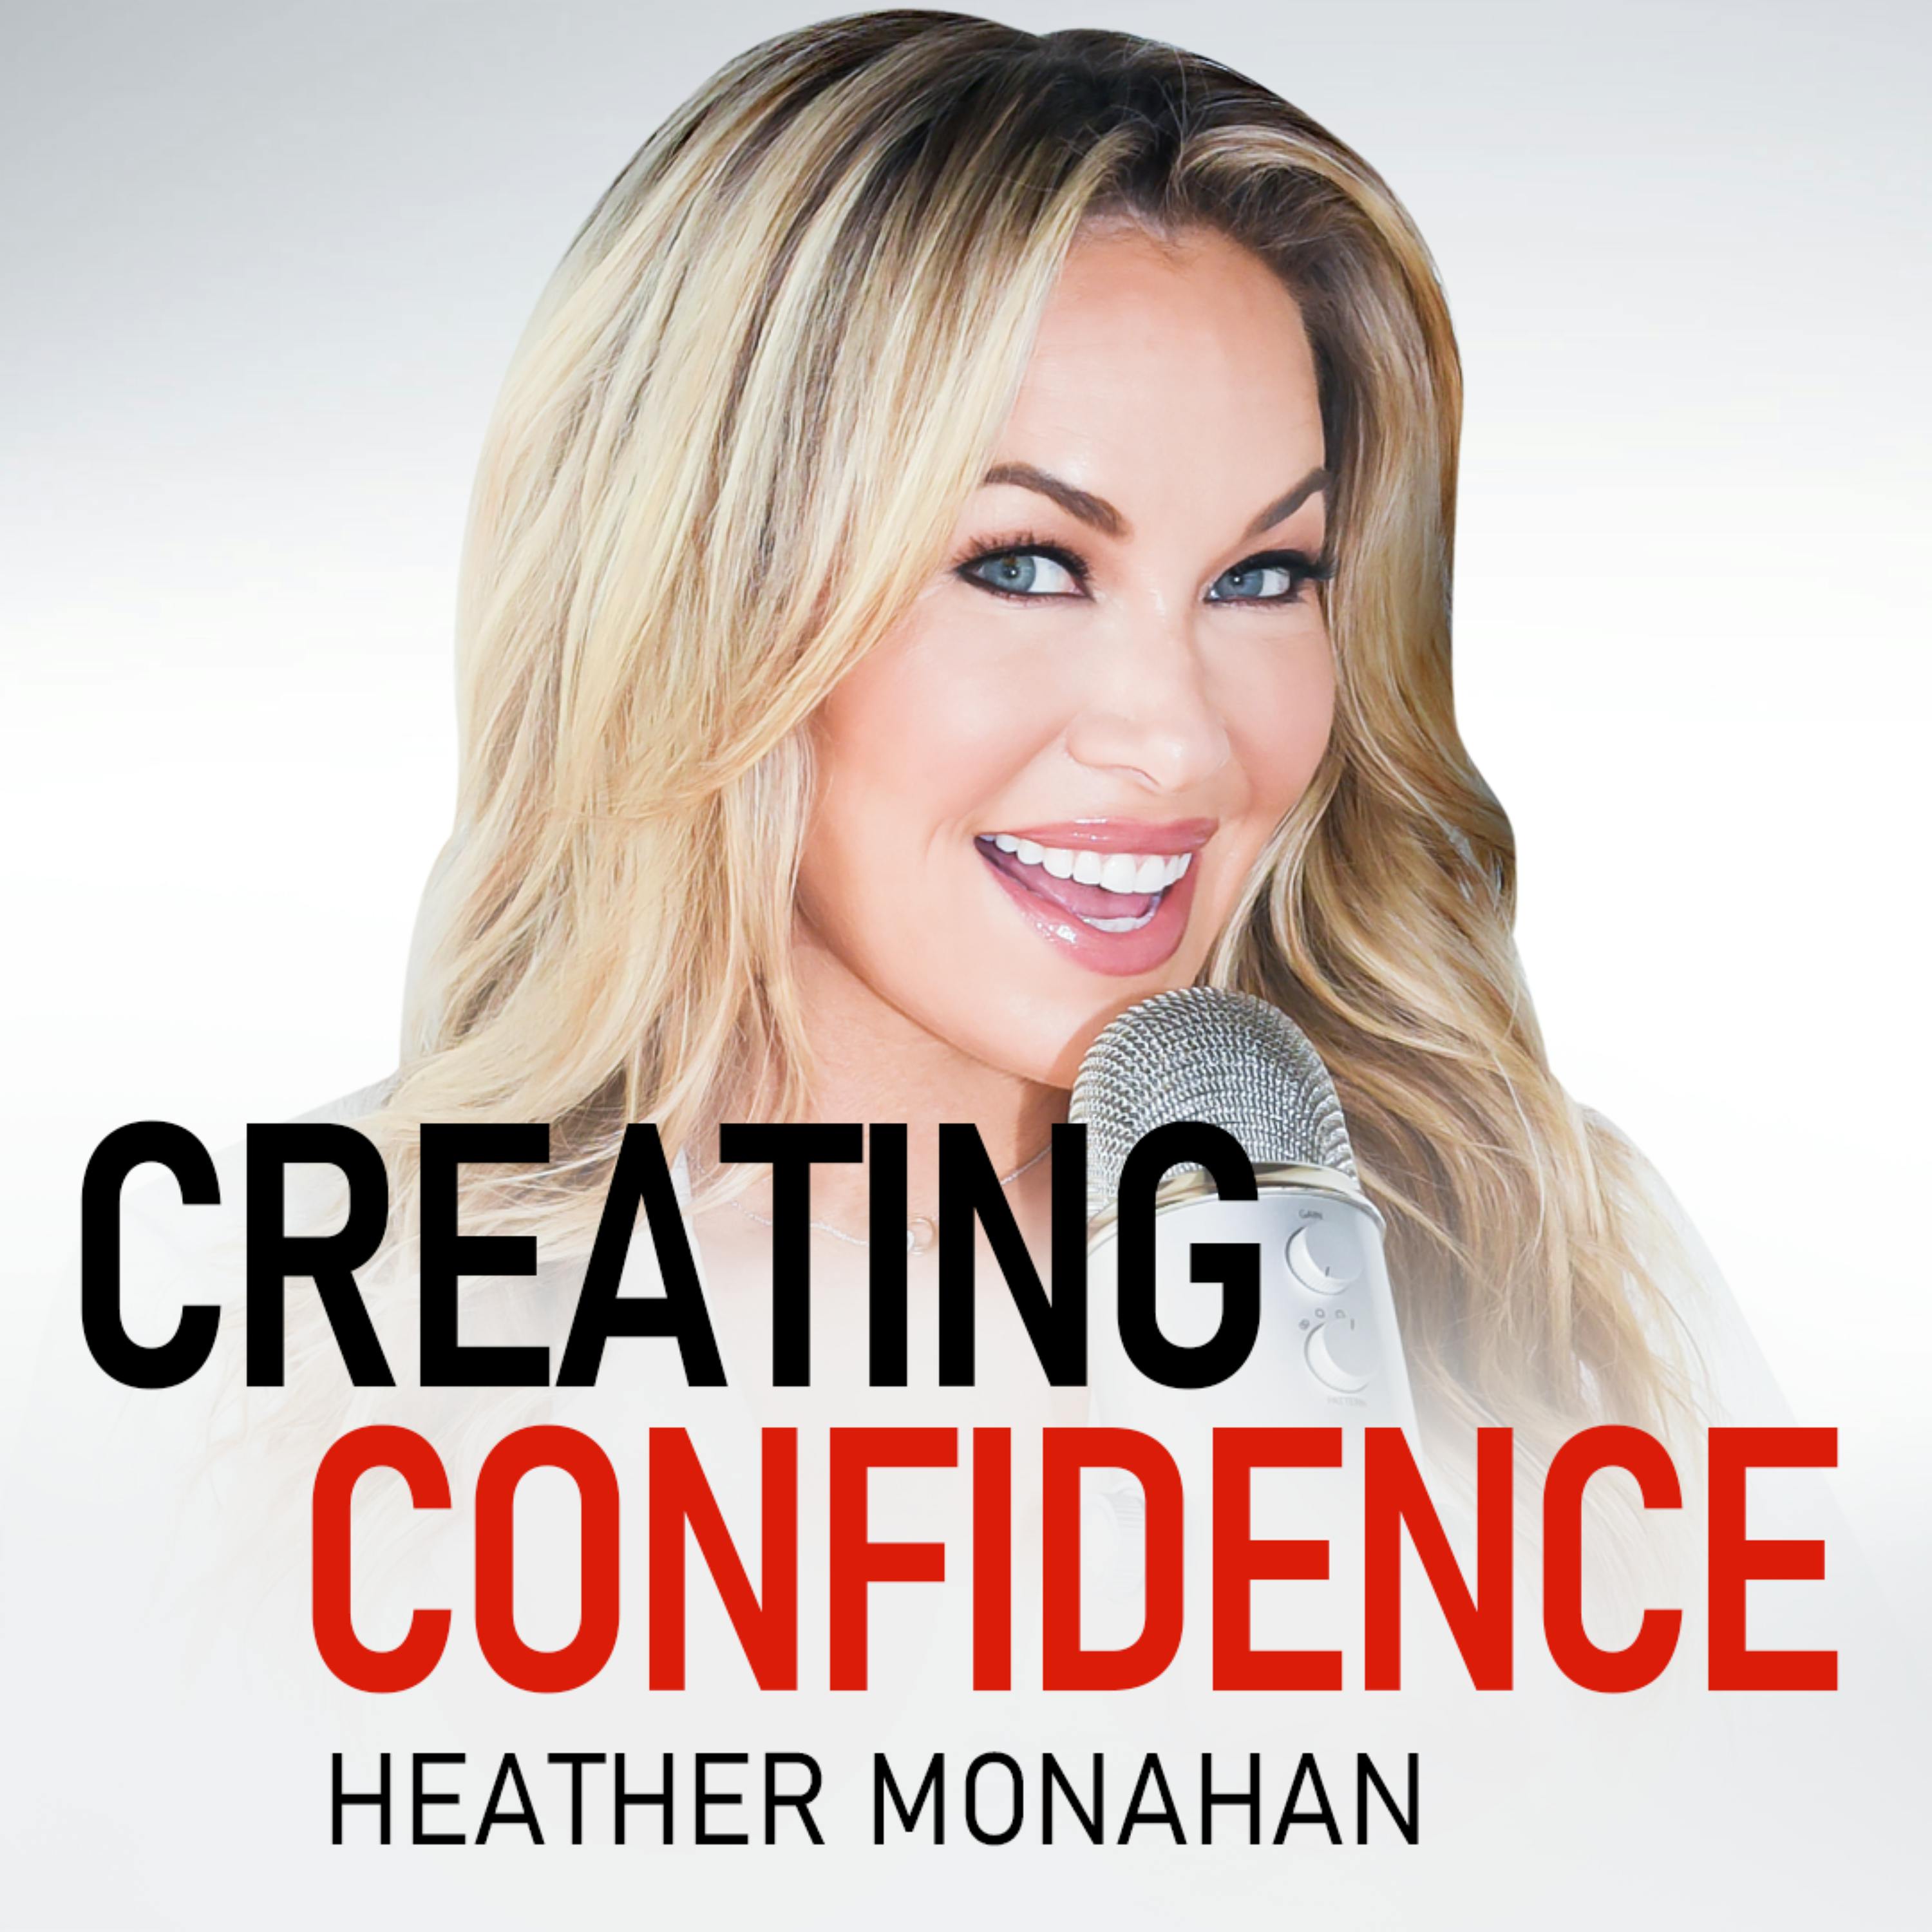 #128: The #1 Tip To Landing Anything Important! with Heather Monahan by Heather Monahan | YAP Media Network